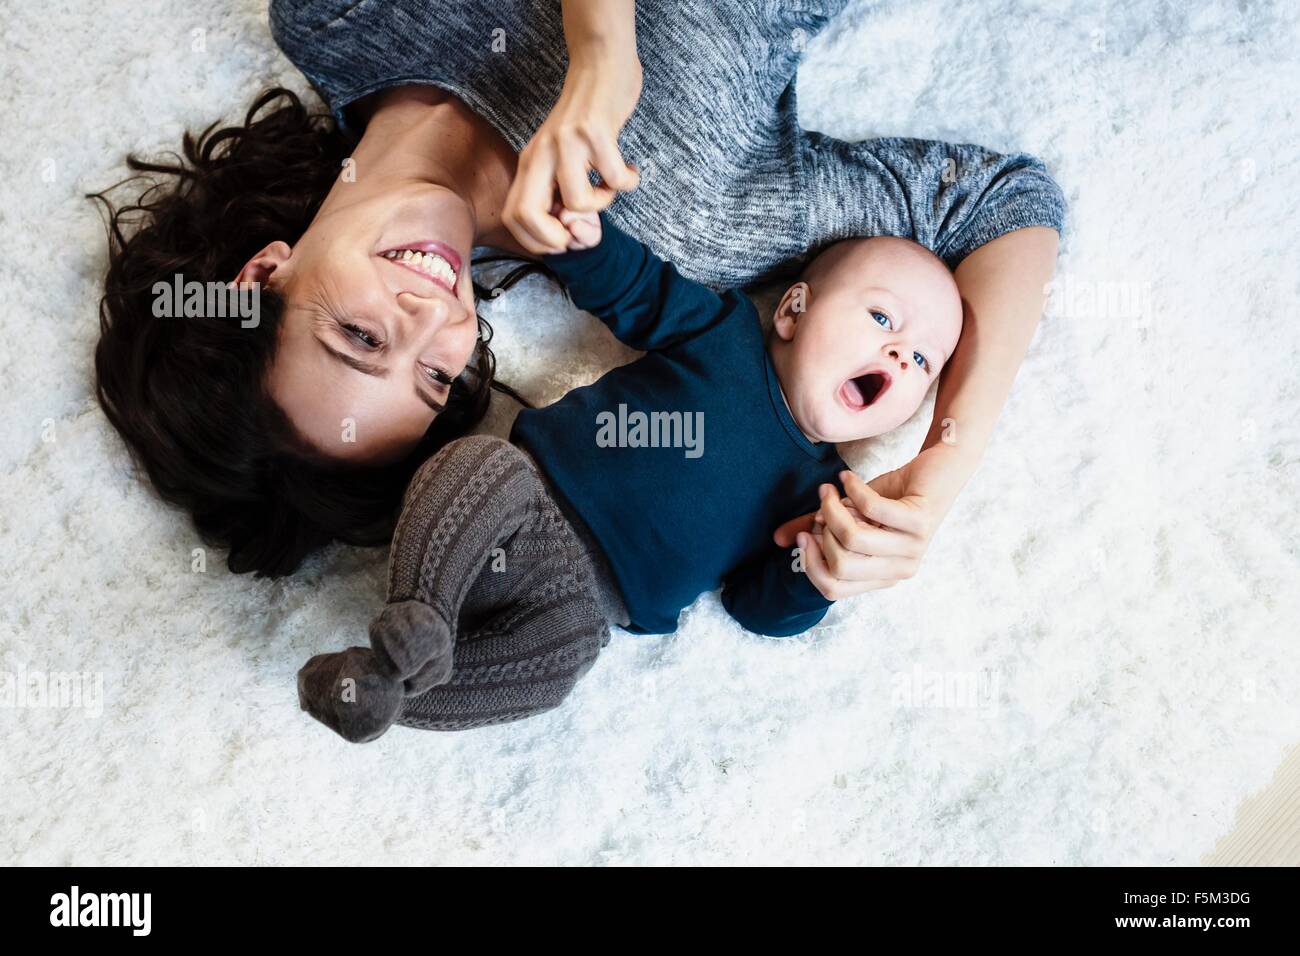 Mother lying on rug with baby son, overhead view Stock Photo